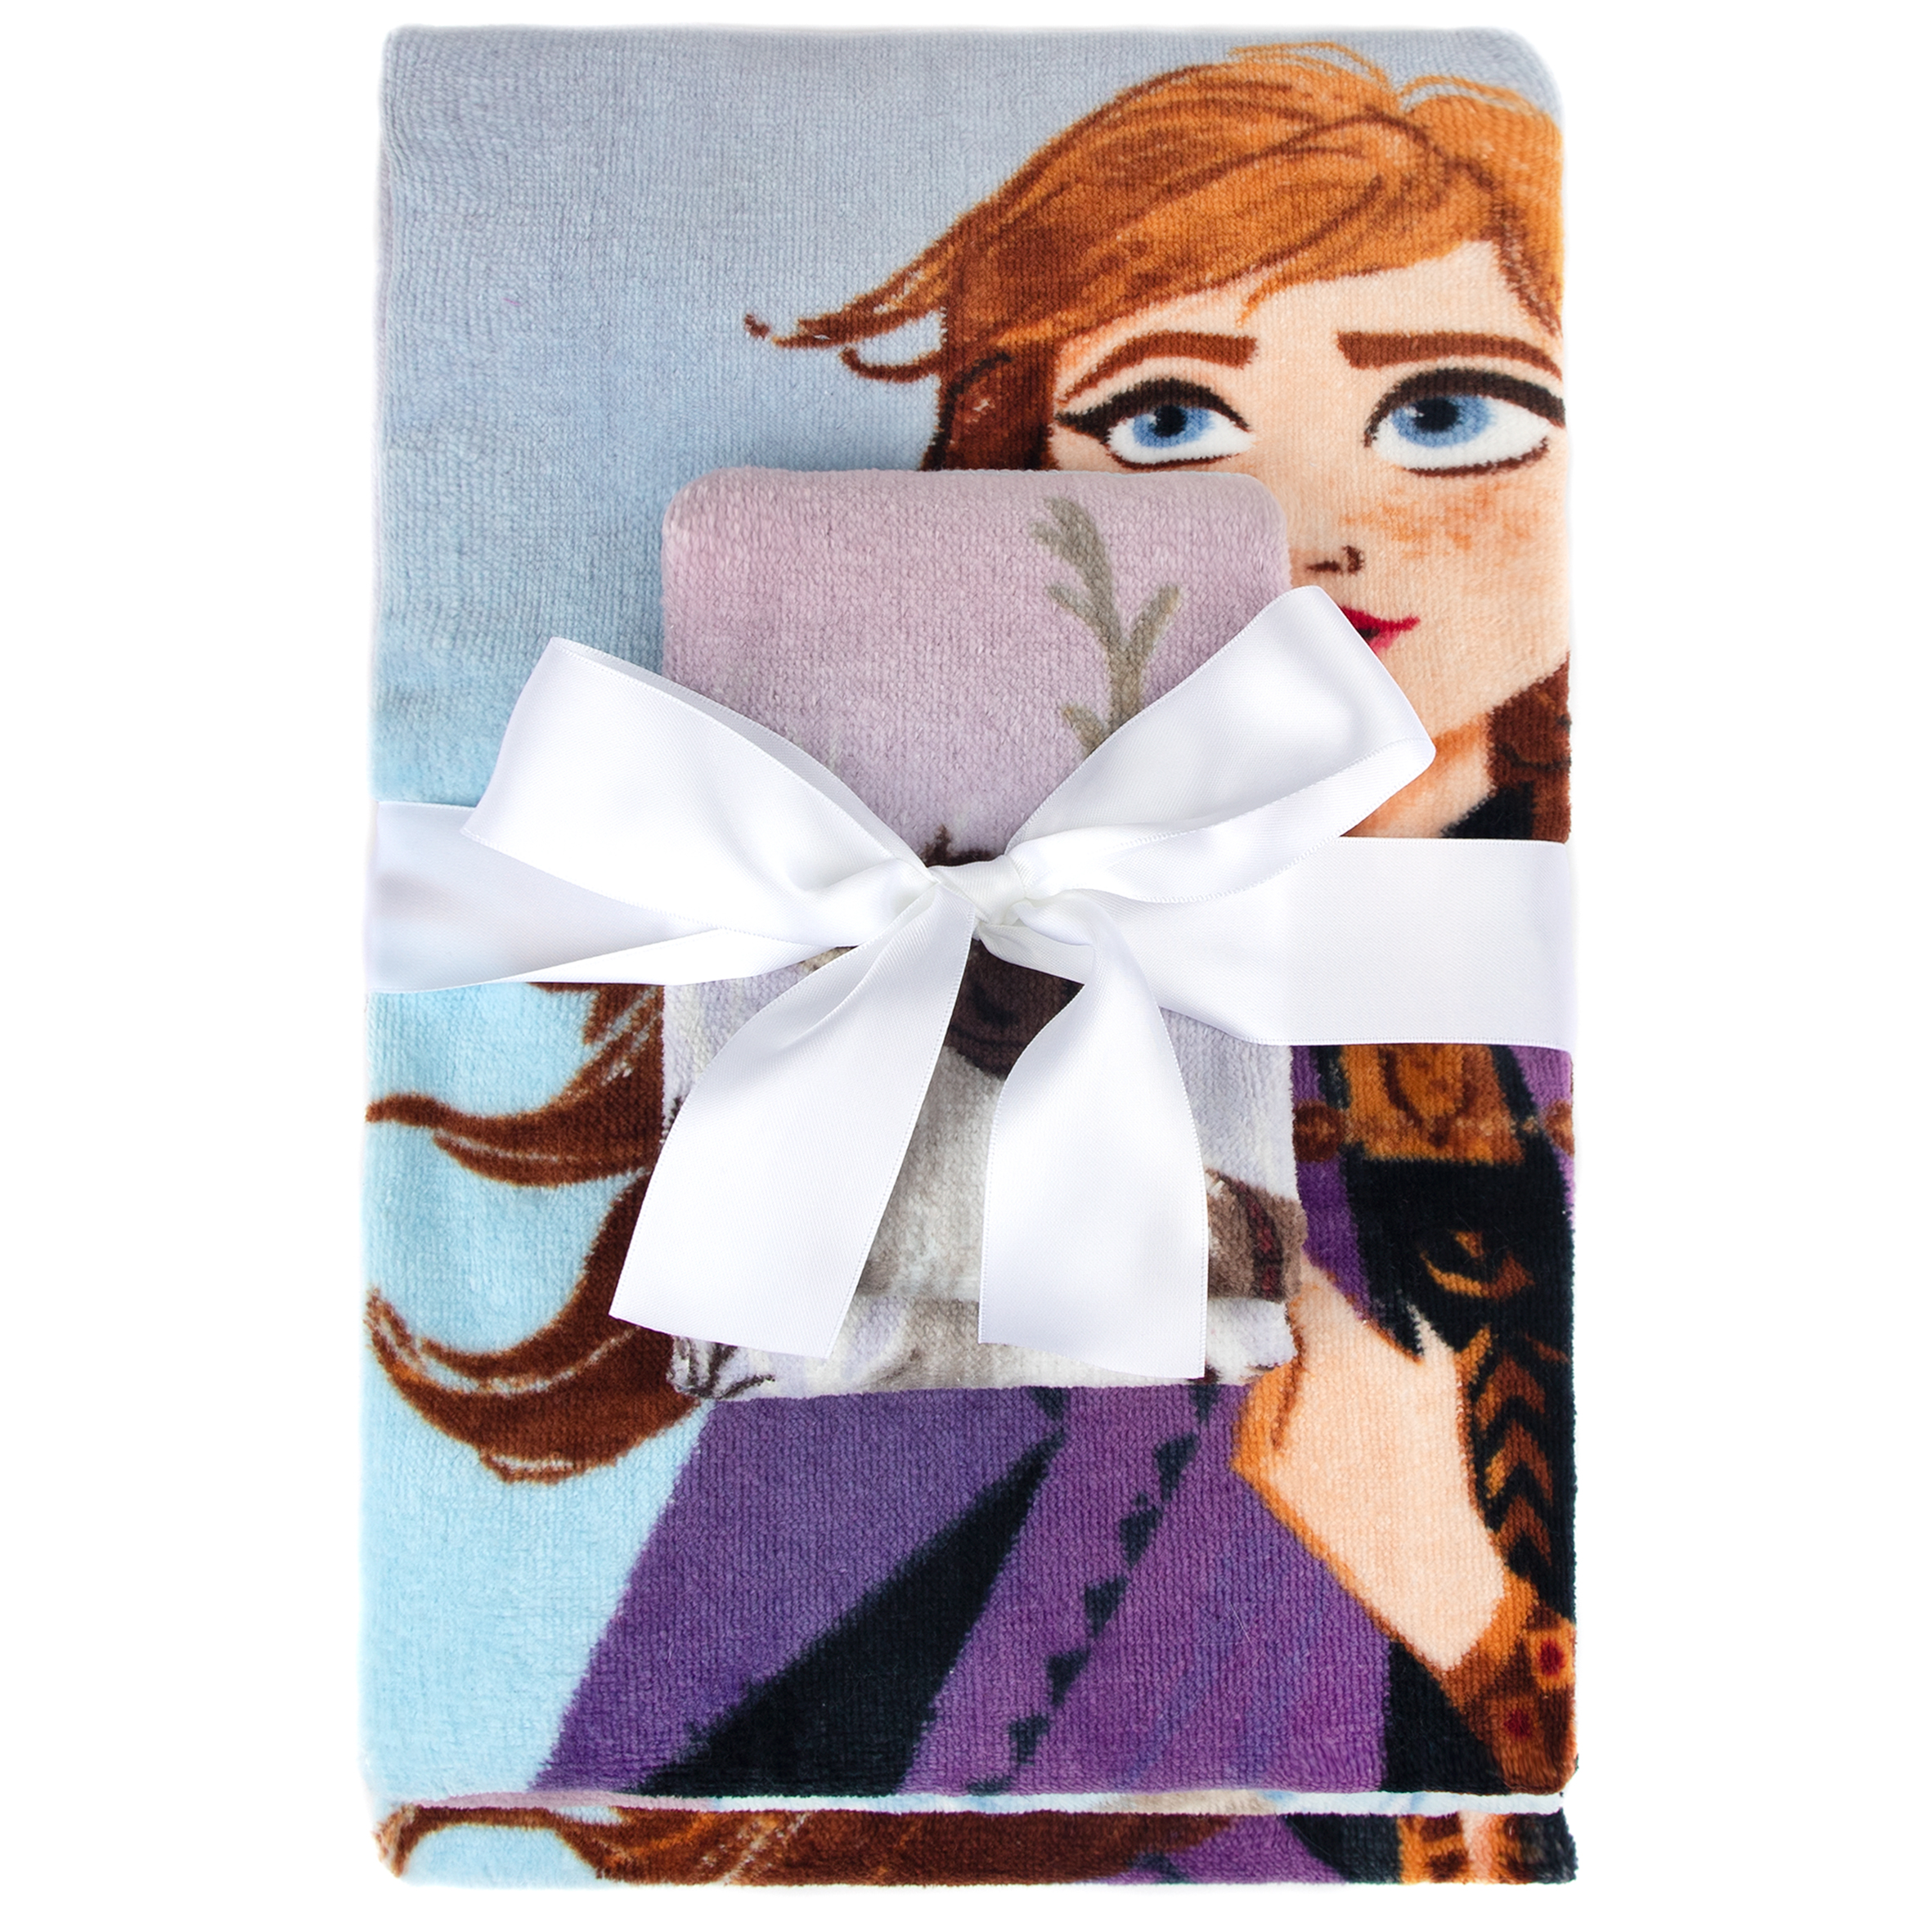 Frozen Kids Cotton 2 Piece Towel and Washcloth Set - image 3 of 6